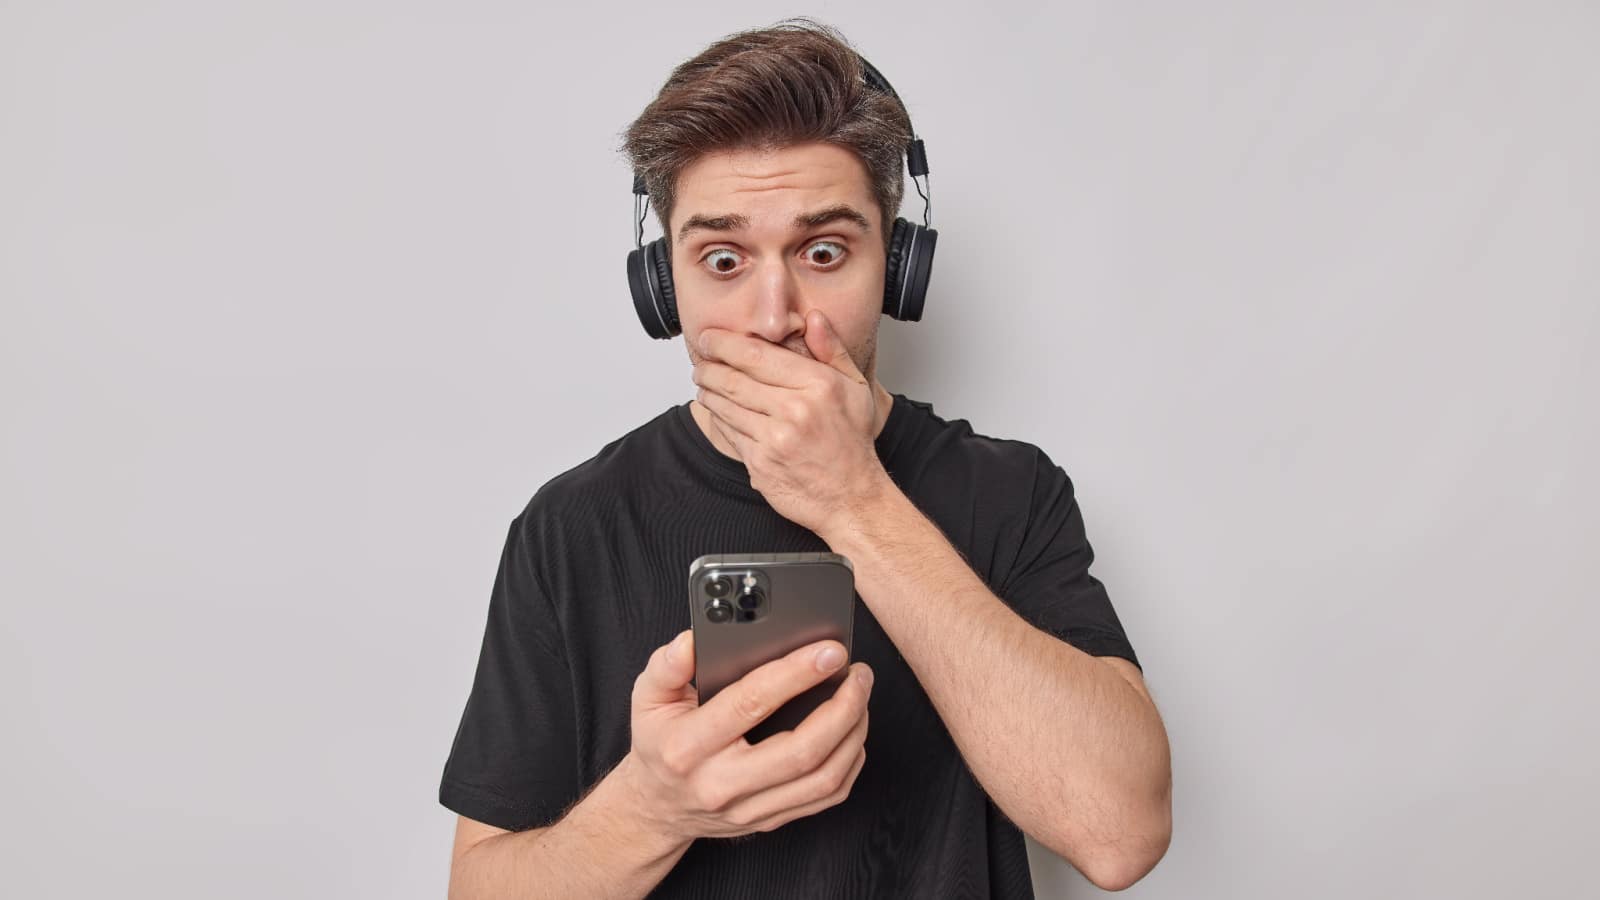 <p>One of the most common gripes about TikTok is how it's ruining music. TikTokers take classic songs and warp them with edits and remixes until they're nauseating. TikTok even ruins modern songs because they play the same 10-second clip so much that they become annoying earworms.</p>